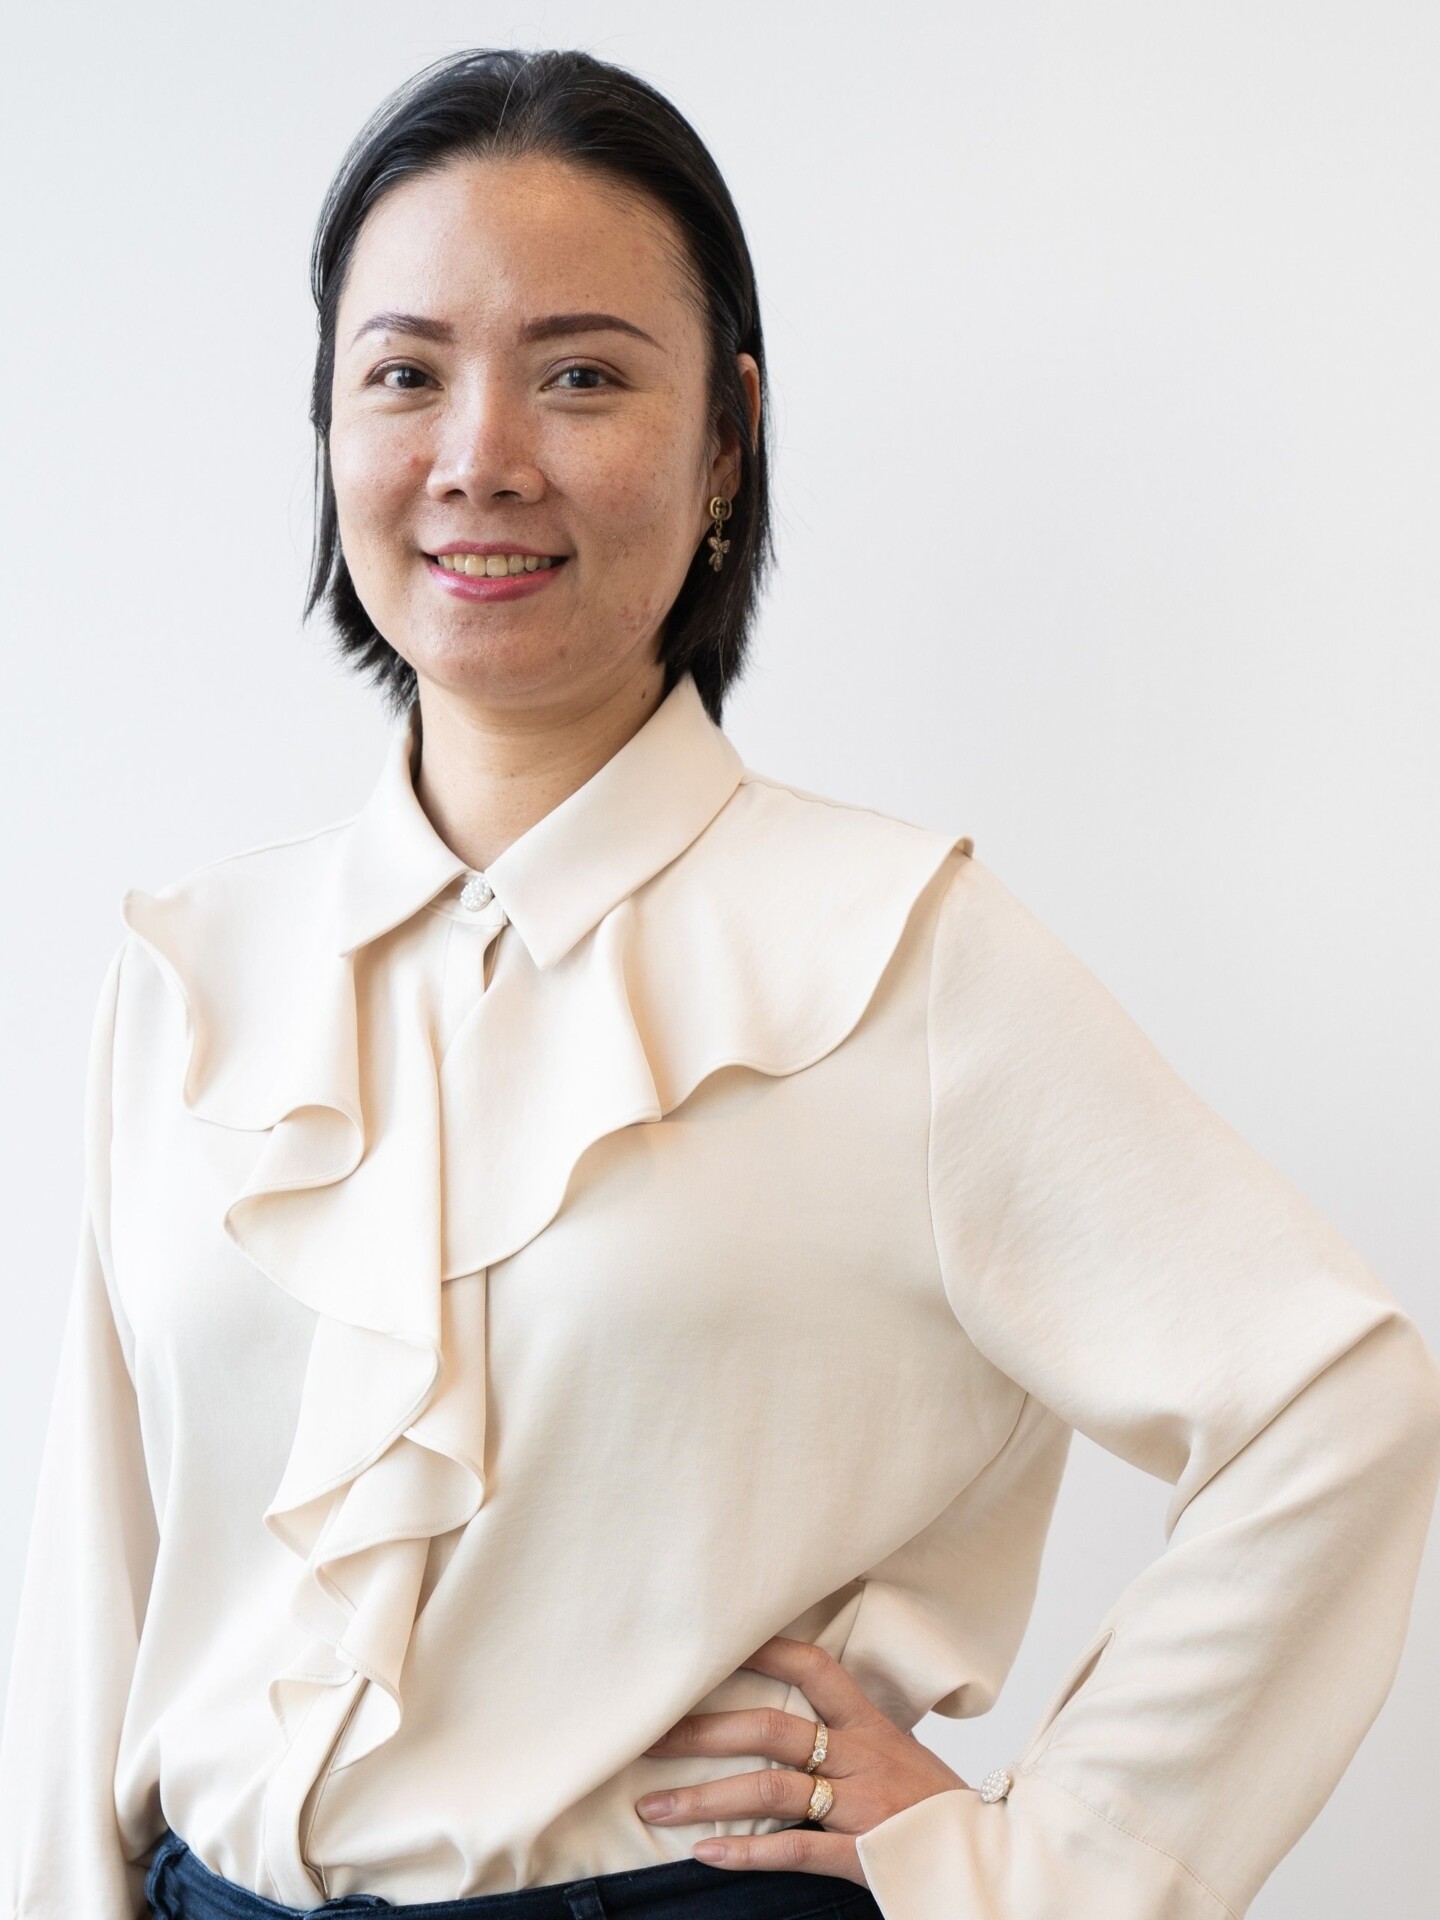 Araya’s ideal day is filled with activity and satisfied customers. What appeals to her in the industry is the abundance of challenges. She prefers to start her evening by cooking Thai dishes and ends the day with a good book, music, or a movie.